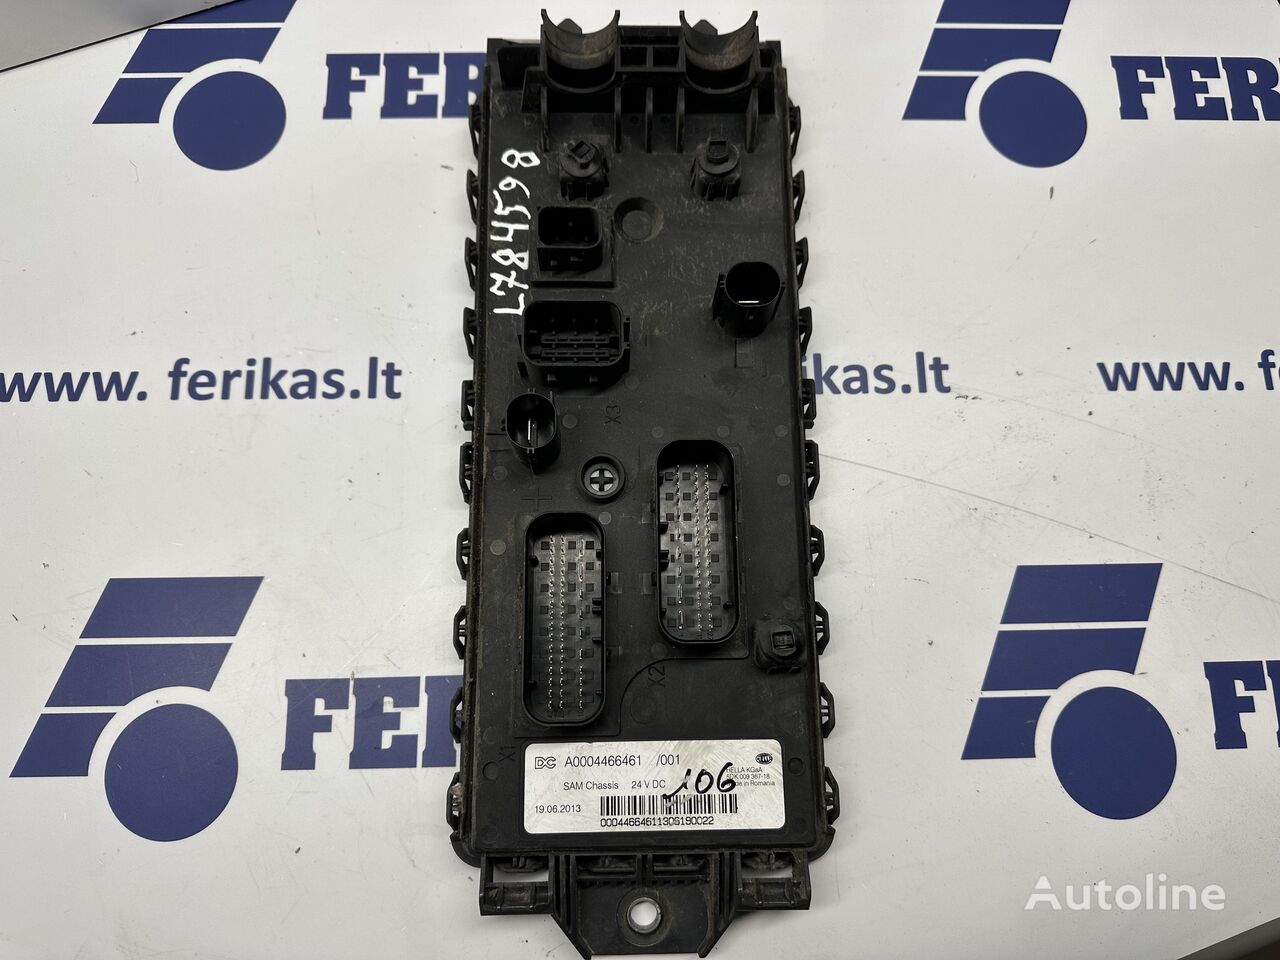 riadiaca jednotka Mercedes-Benz Chassis control unit A0004466461 na ťahača Mercedes-Benz Actros MP4 SAM Chassis